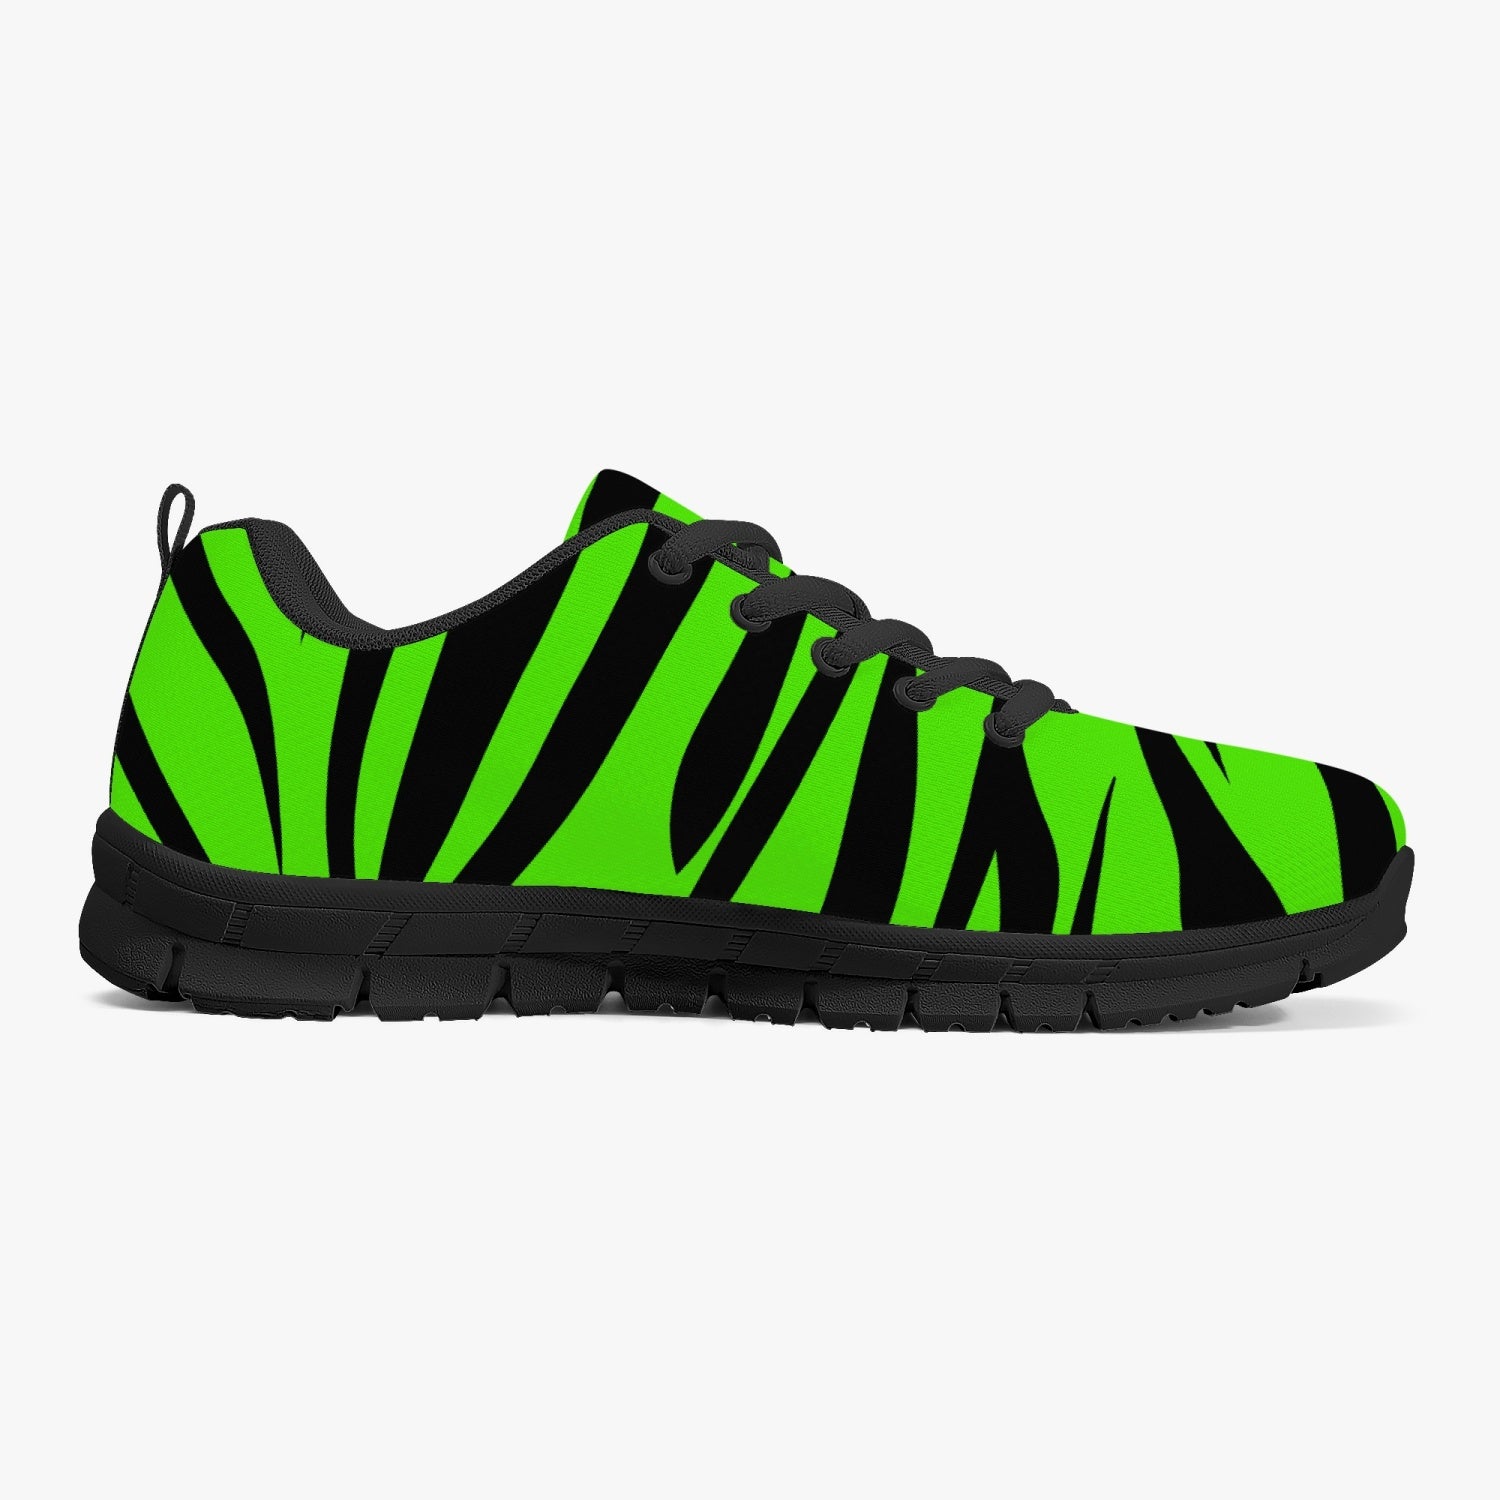 Green Eye Of The Tiger Sneakers